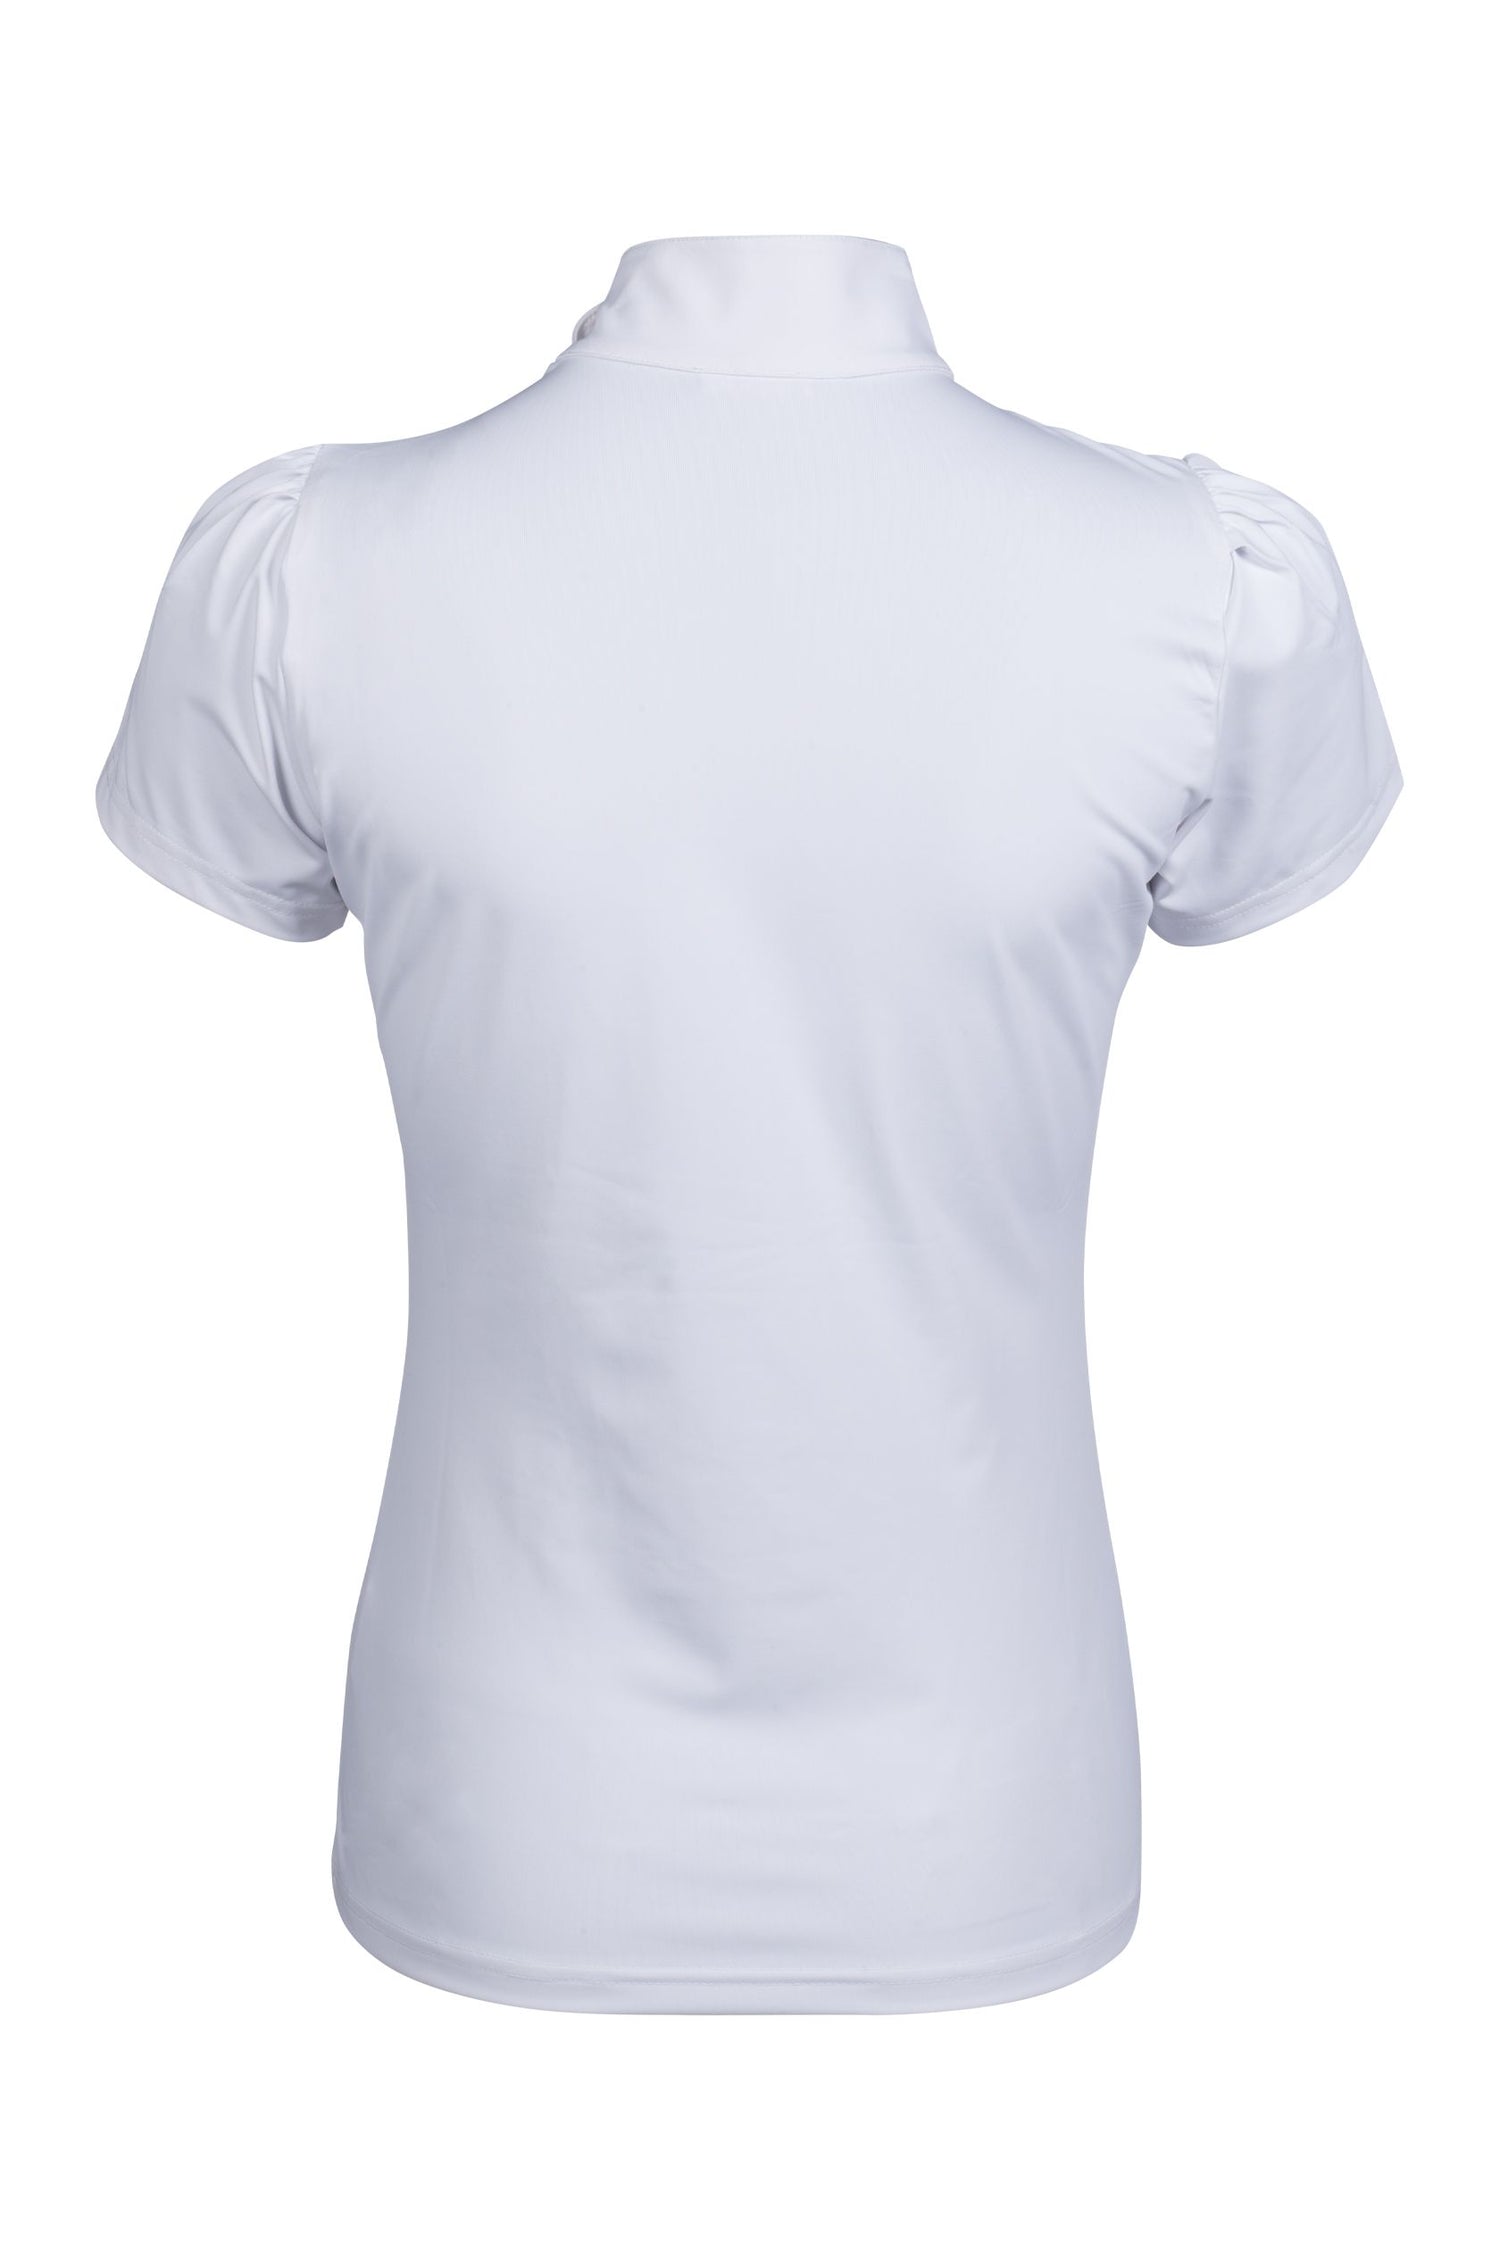 HKM show shirt in white